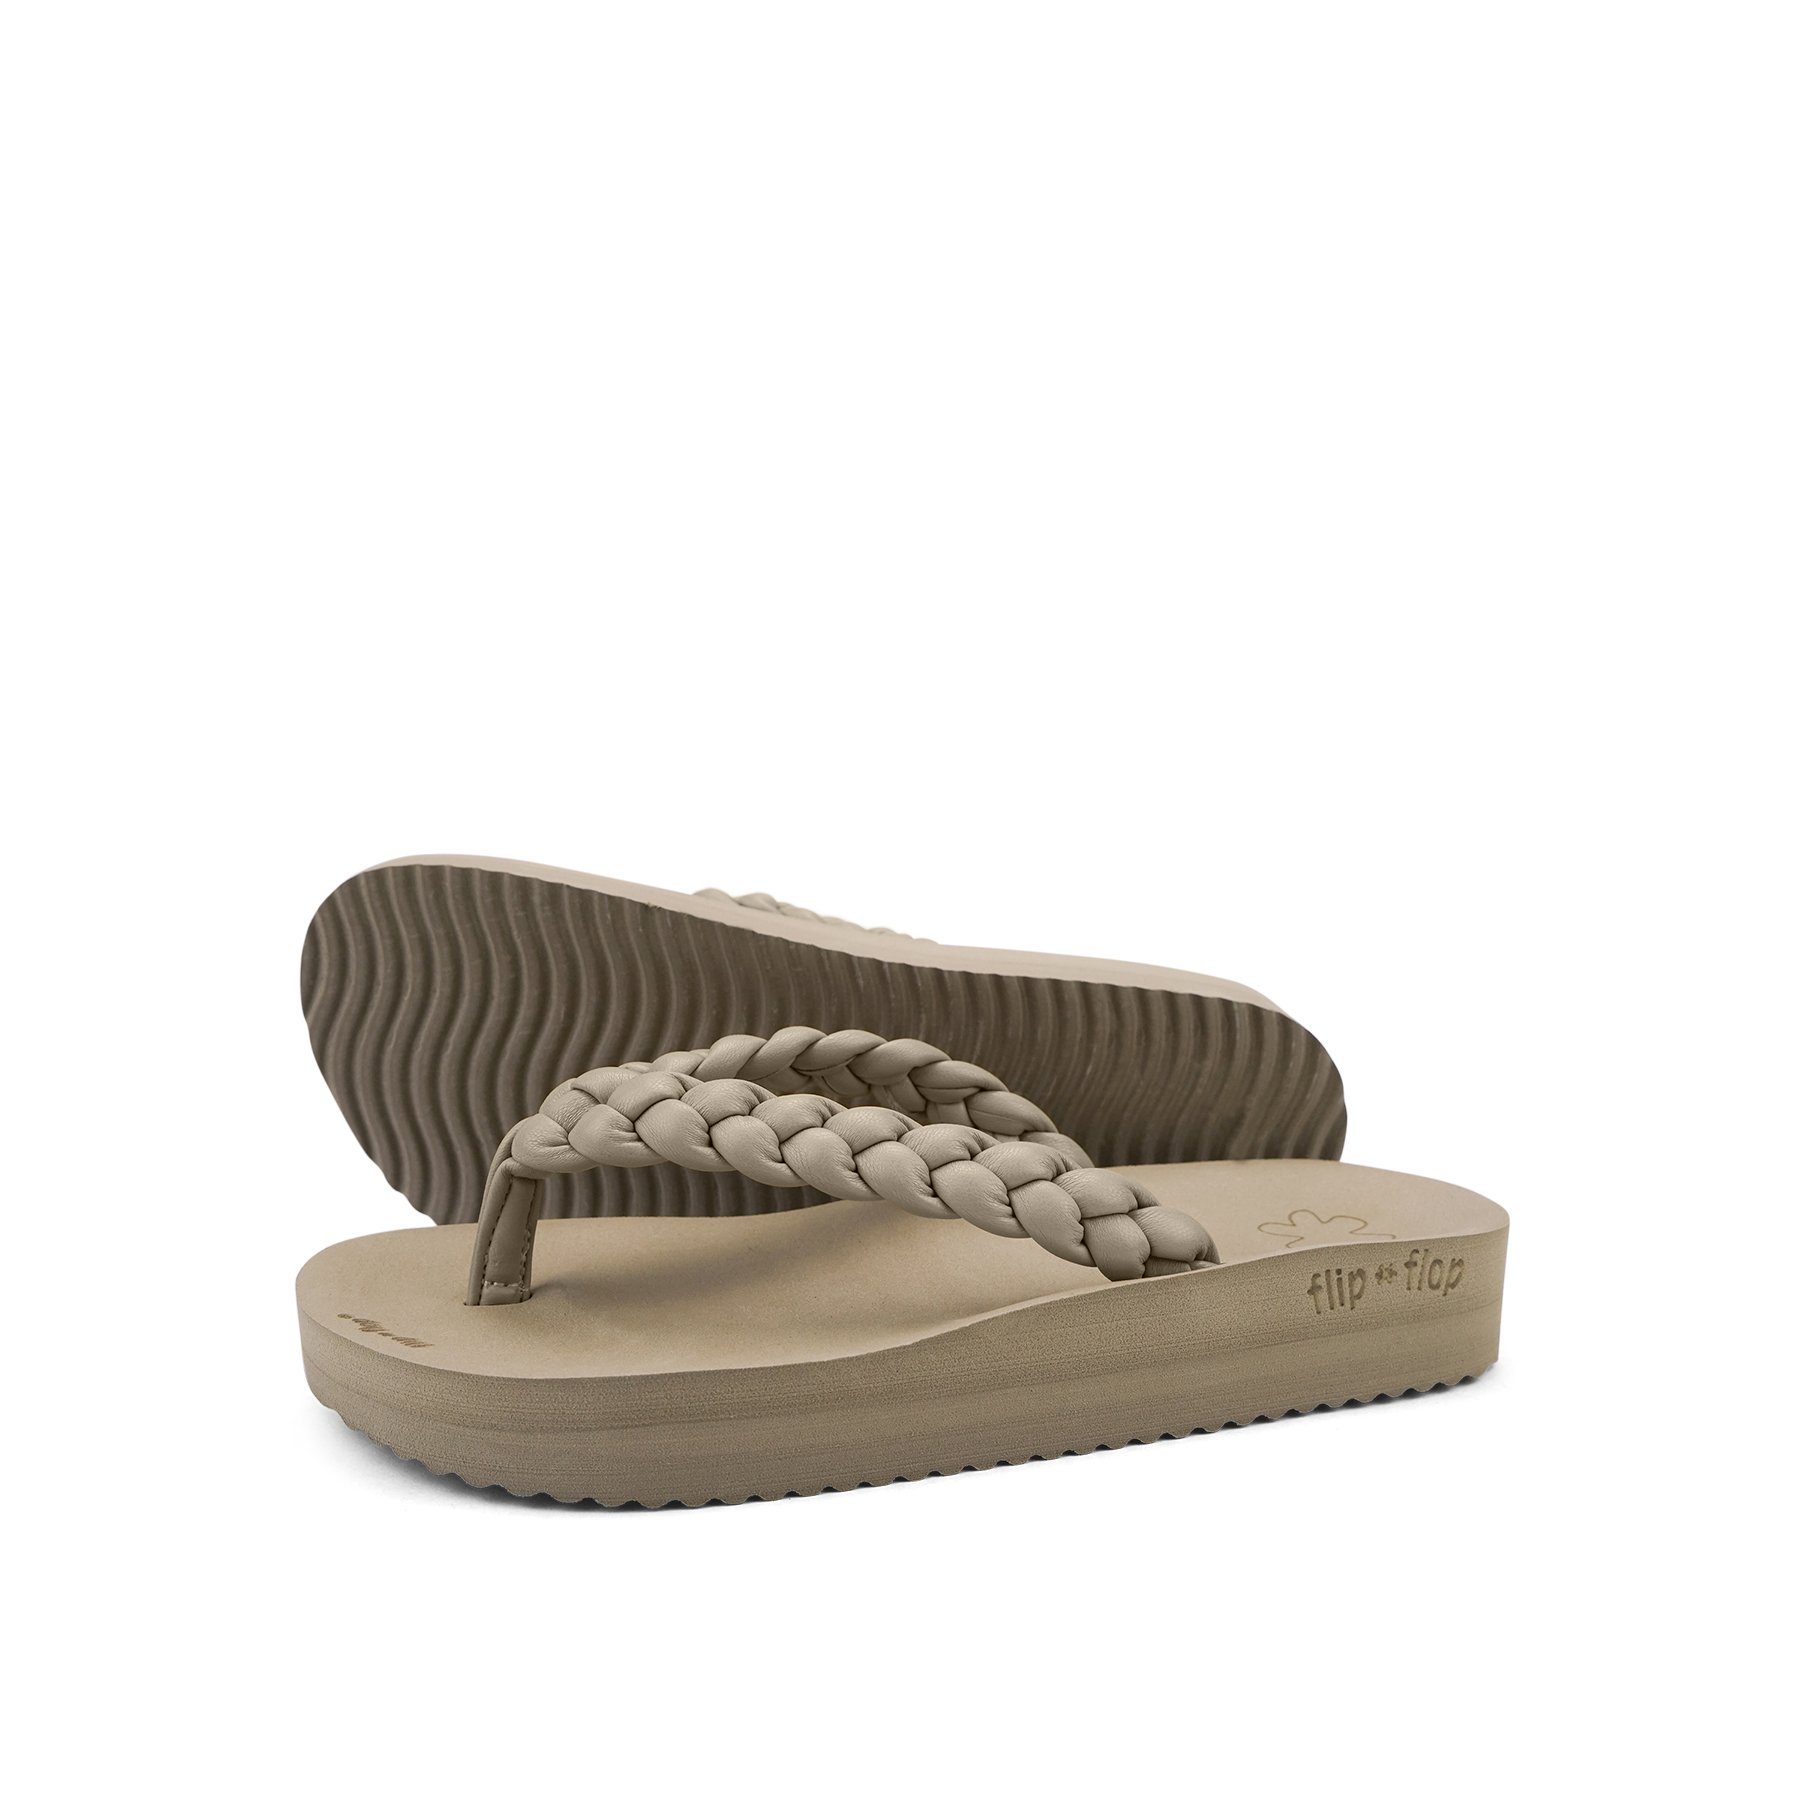 Flip Flop wedgy*weave Zehentrenner taupe